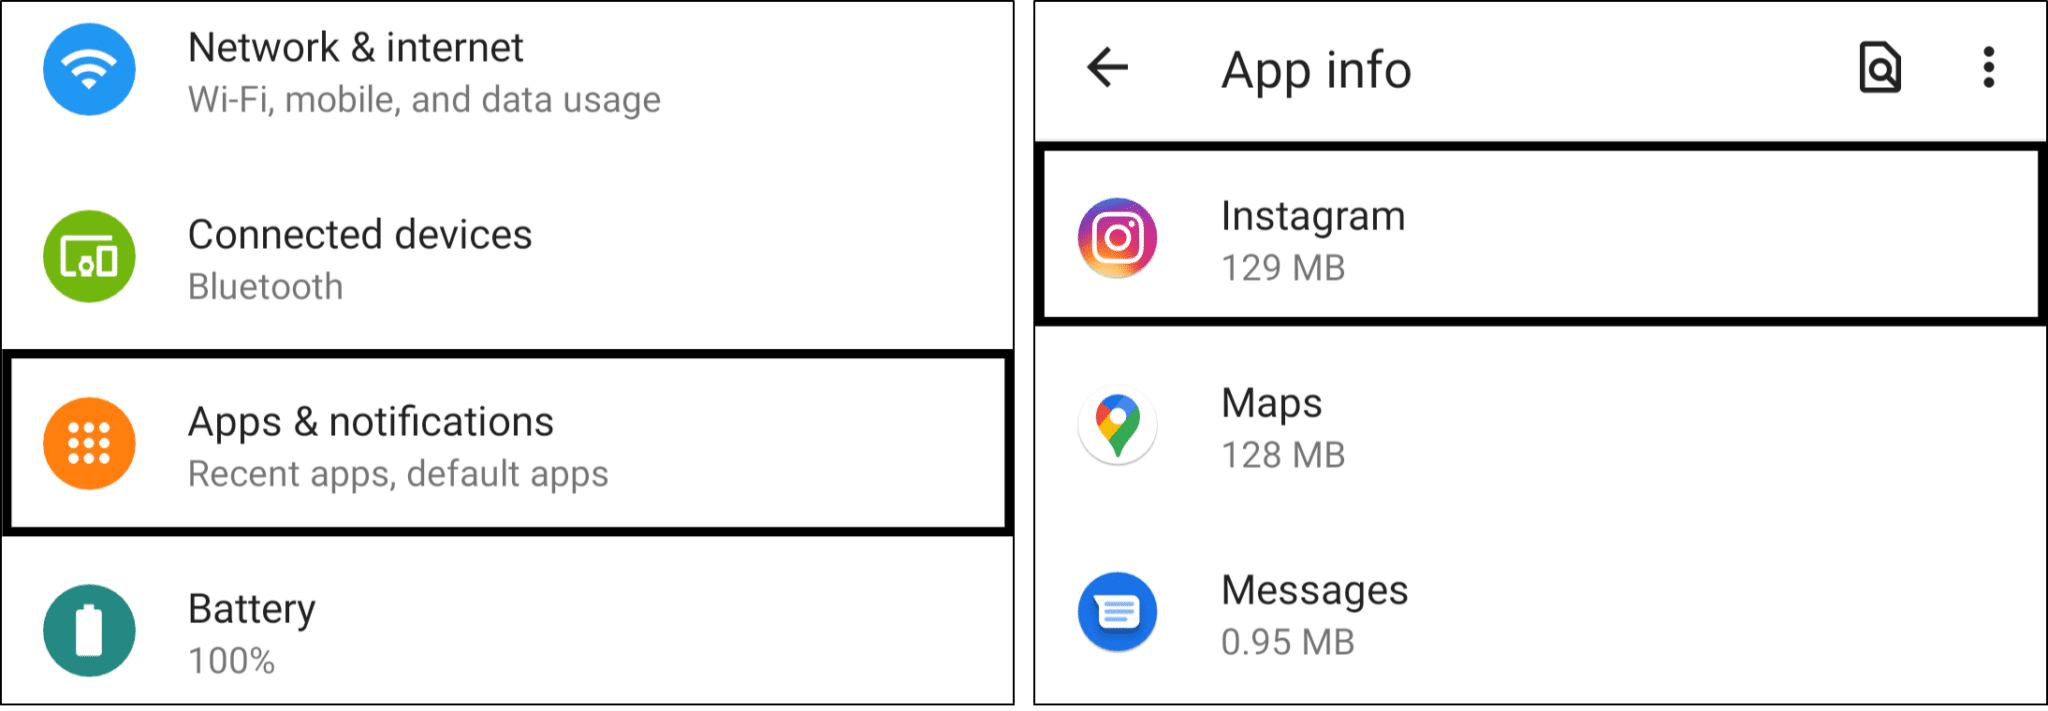 clear instagram cache and app data on android to fix comments not showing, "Couldn't post", or blocked